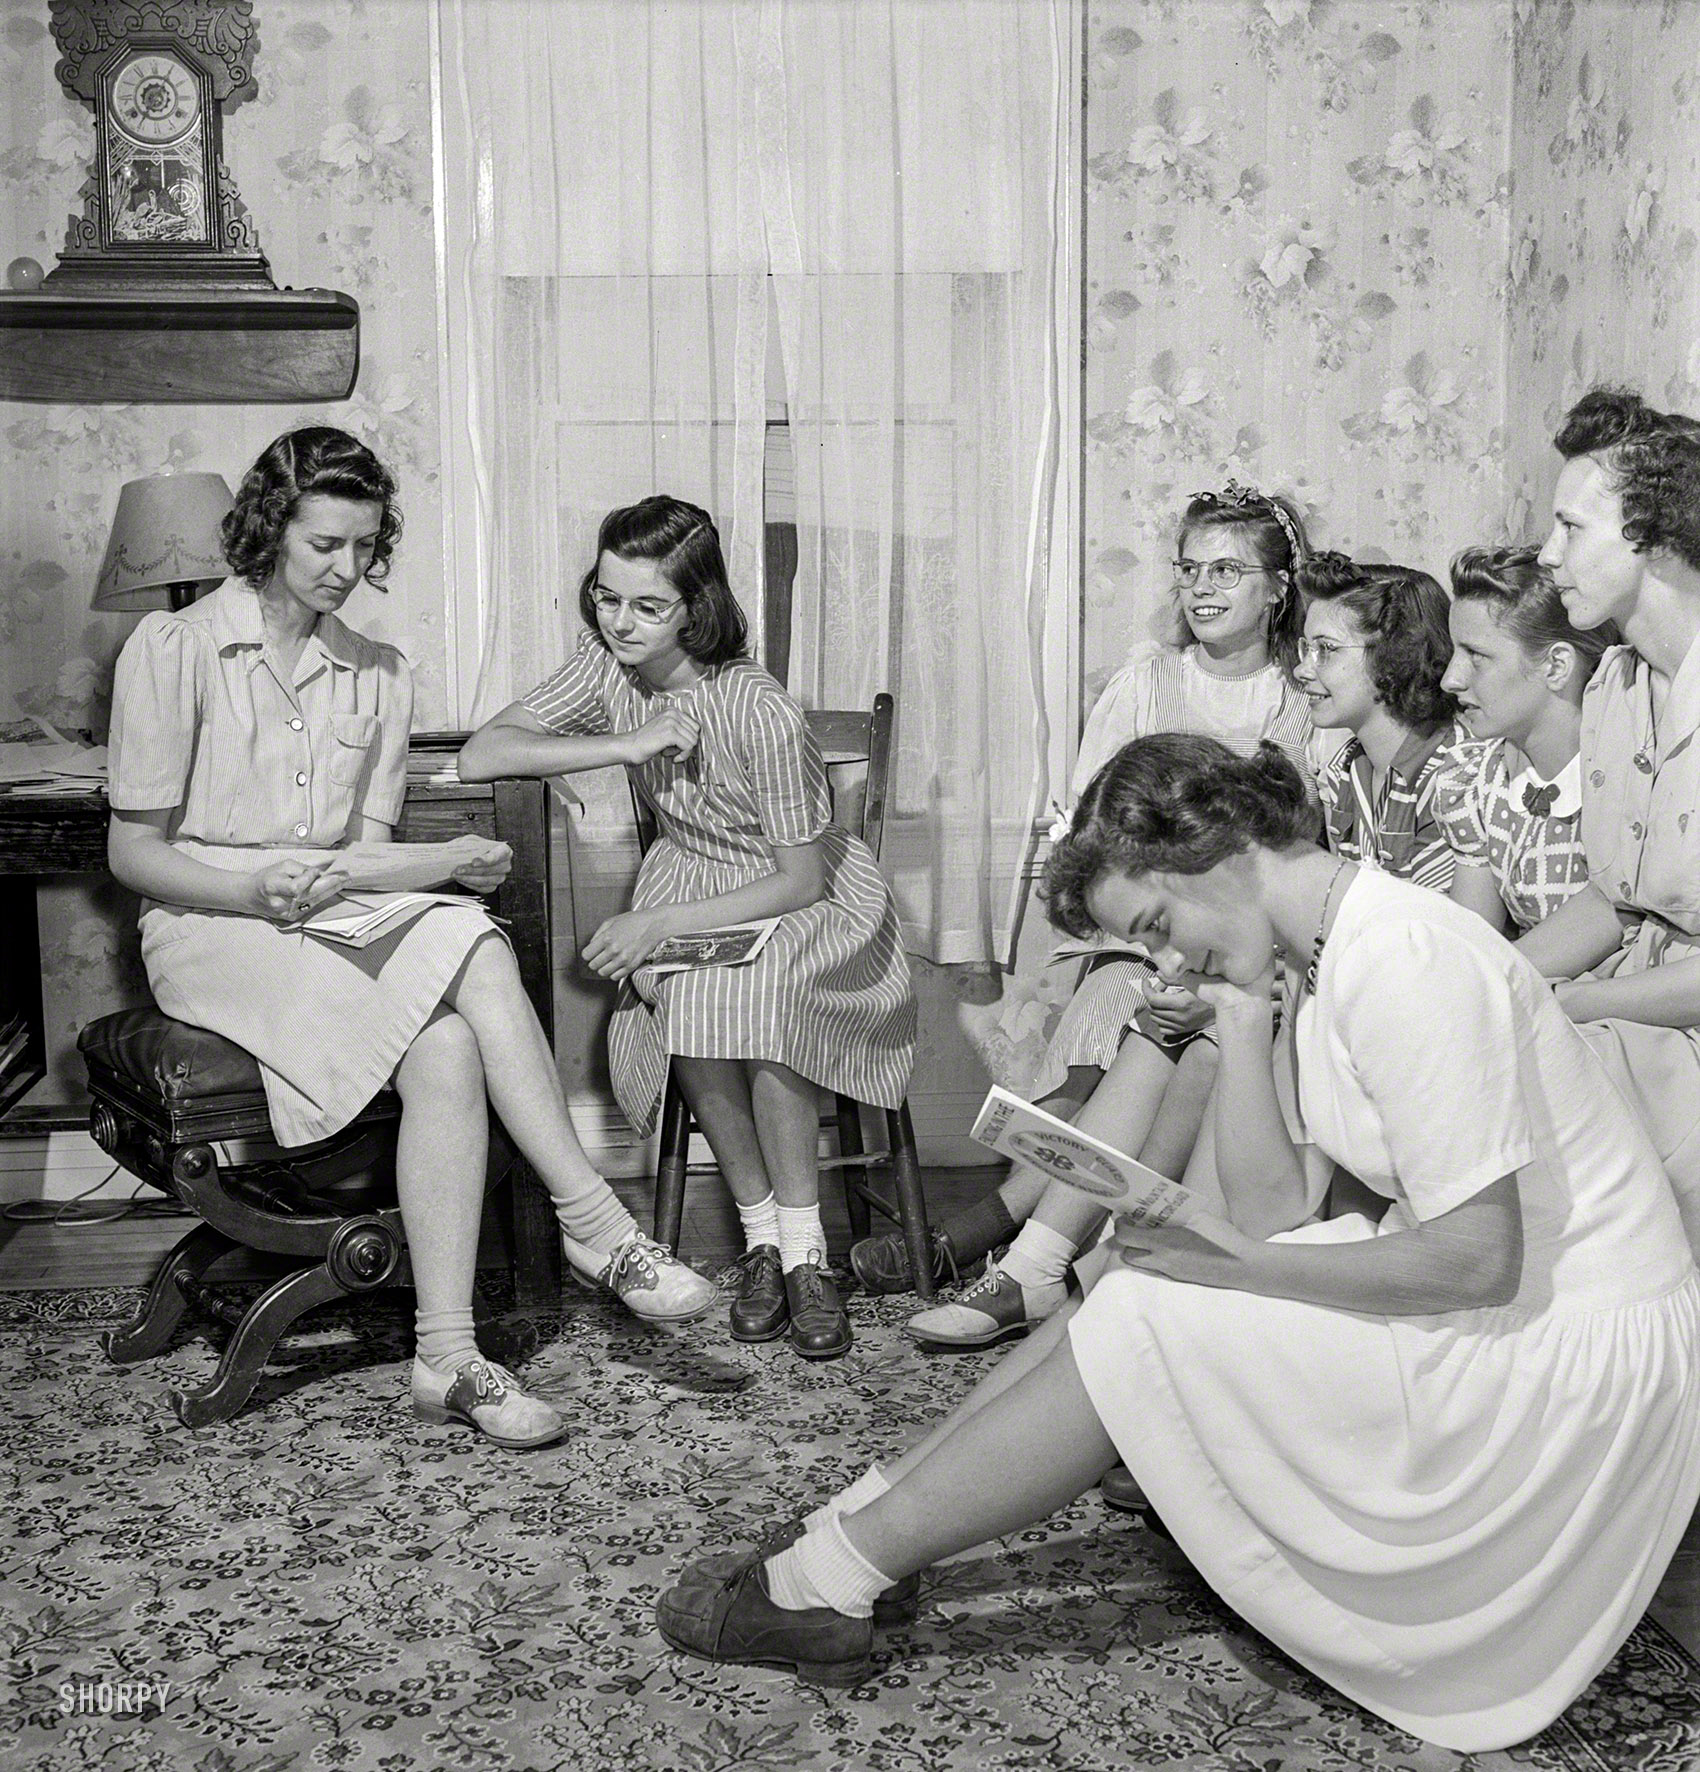 July 1942. "East Montpelier, Vermont. Marilyn Ormsbee, in striped dress (last seen here), is president of her 4-H Club, the Montpelier Center Girls, where she learns how to sew and cook economically and well." Medium format negative by Fritz Henle for the Office of War Information. View full size.